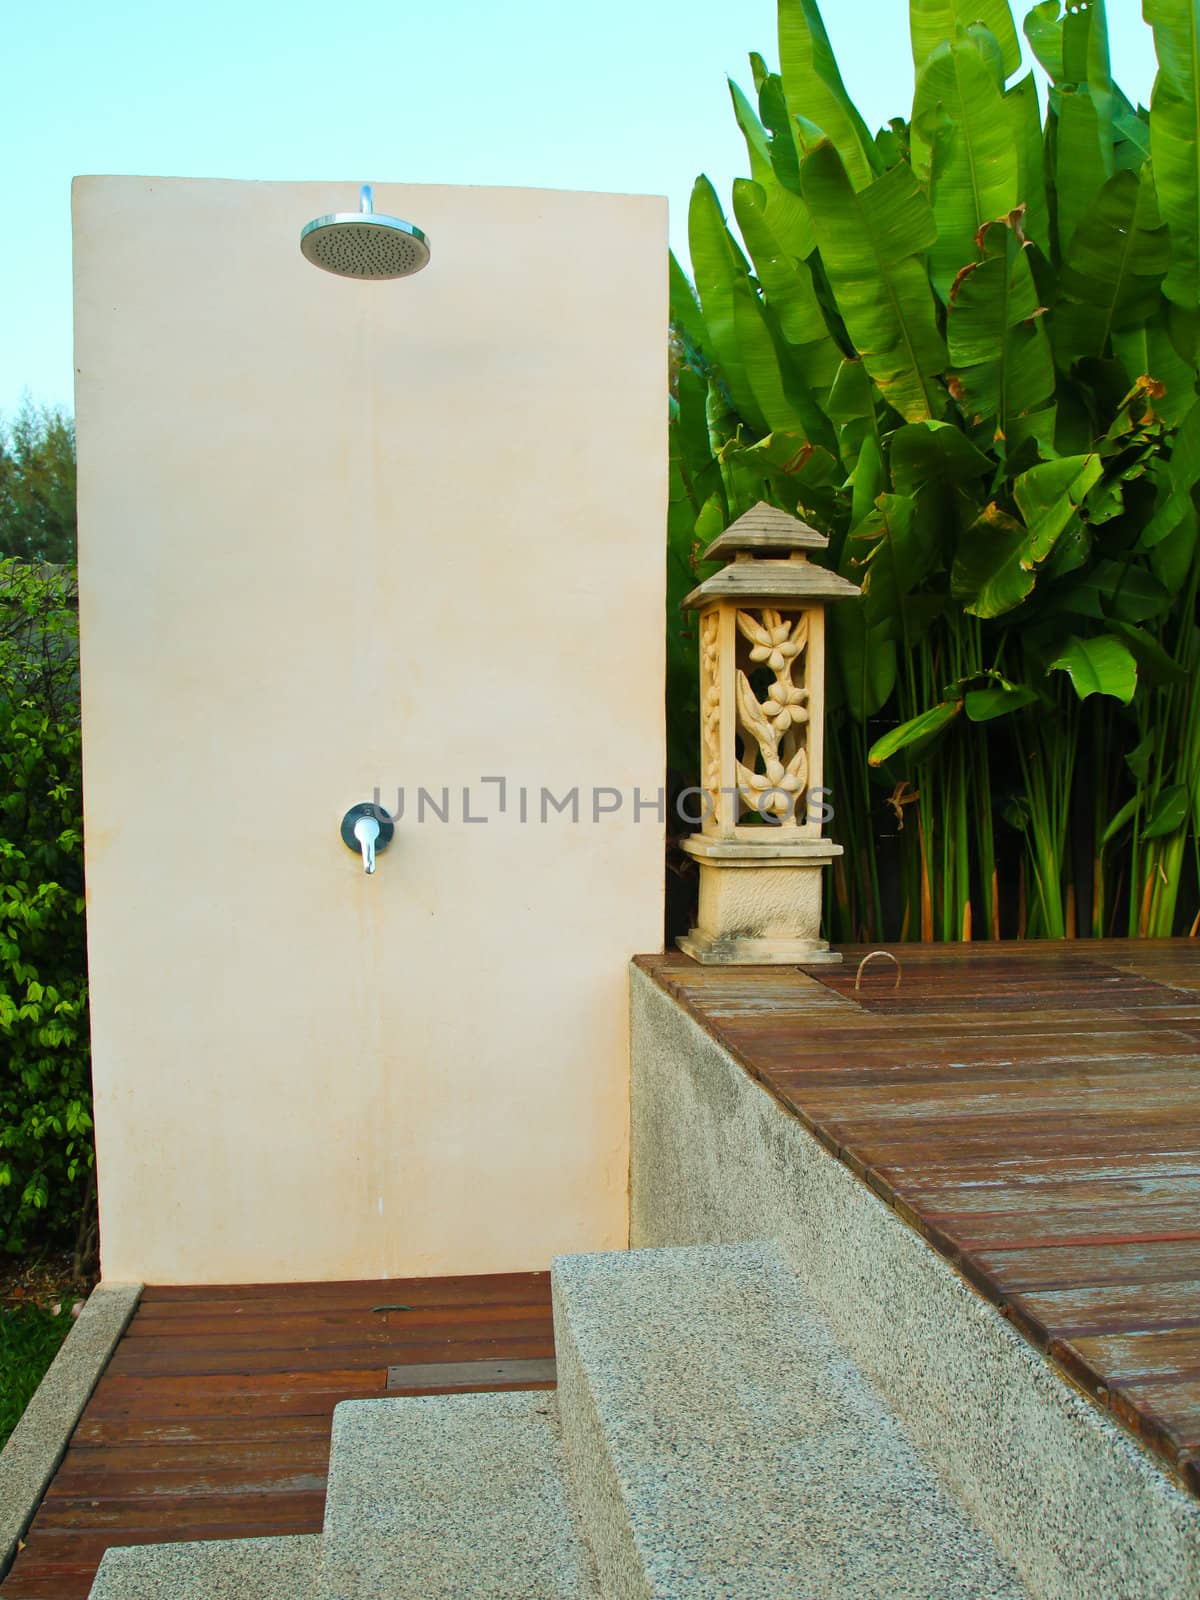 outdoor shower near swimming pool in tropical resort by nuchylee